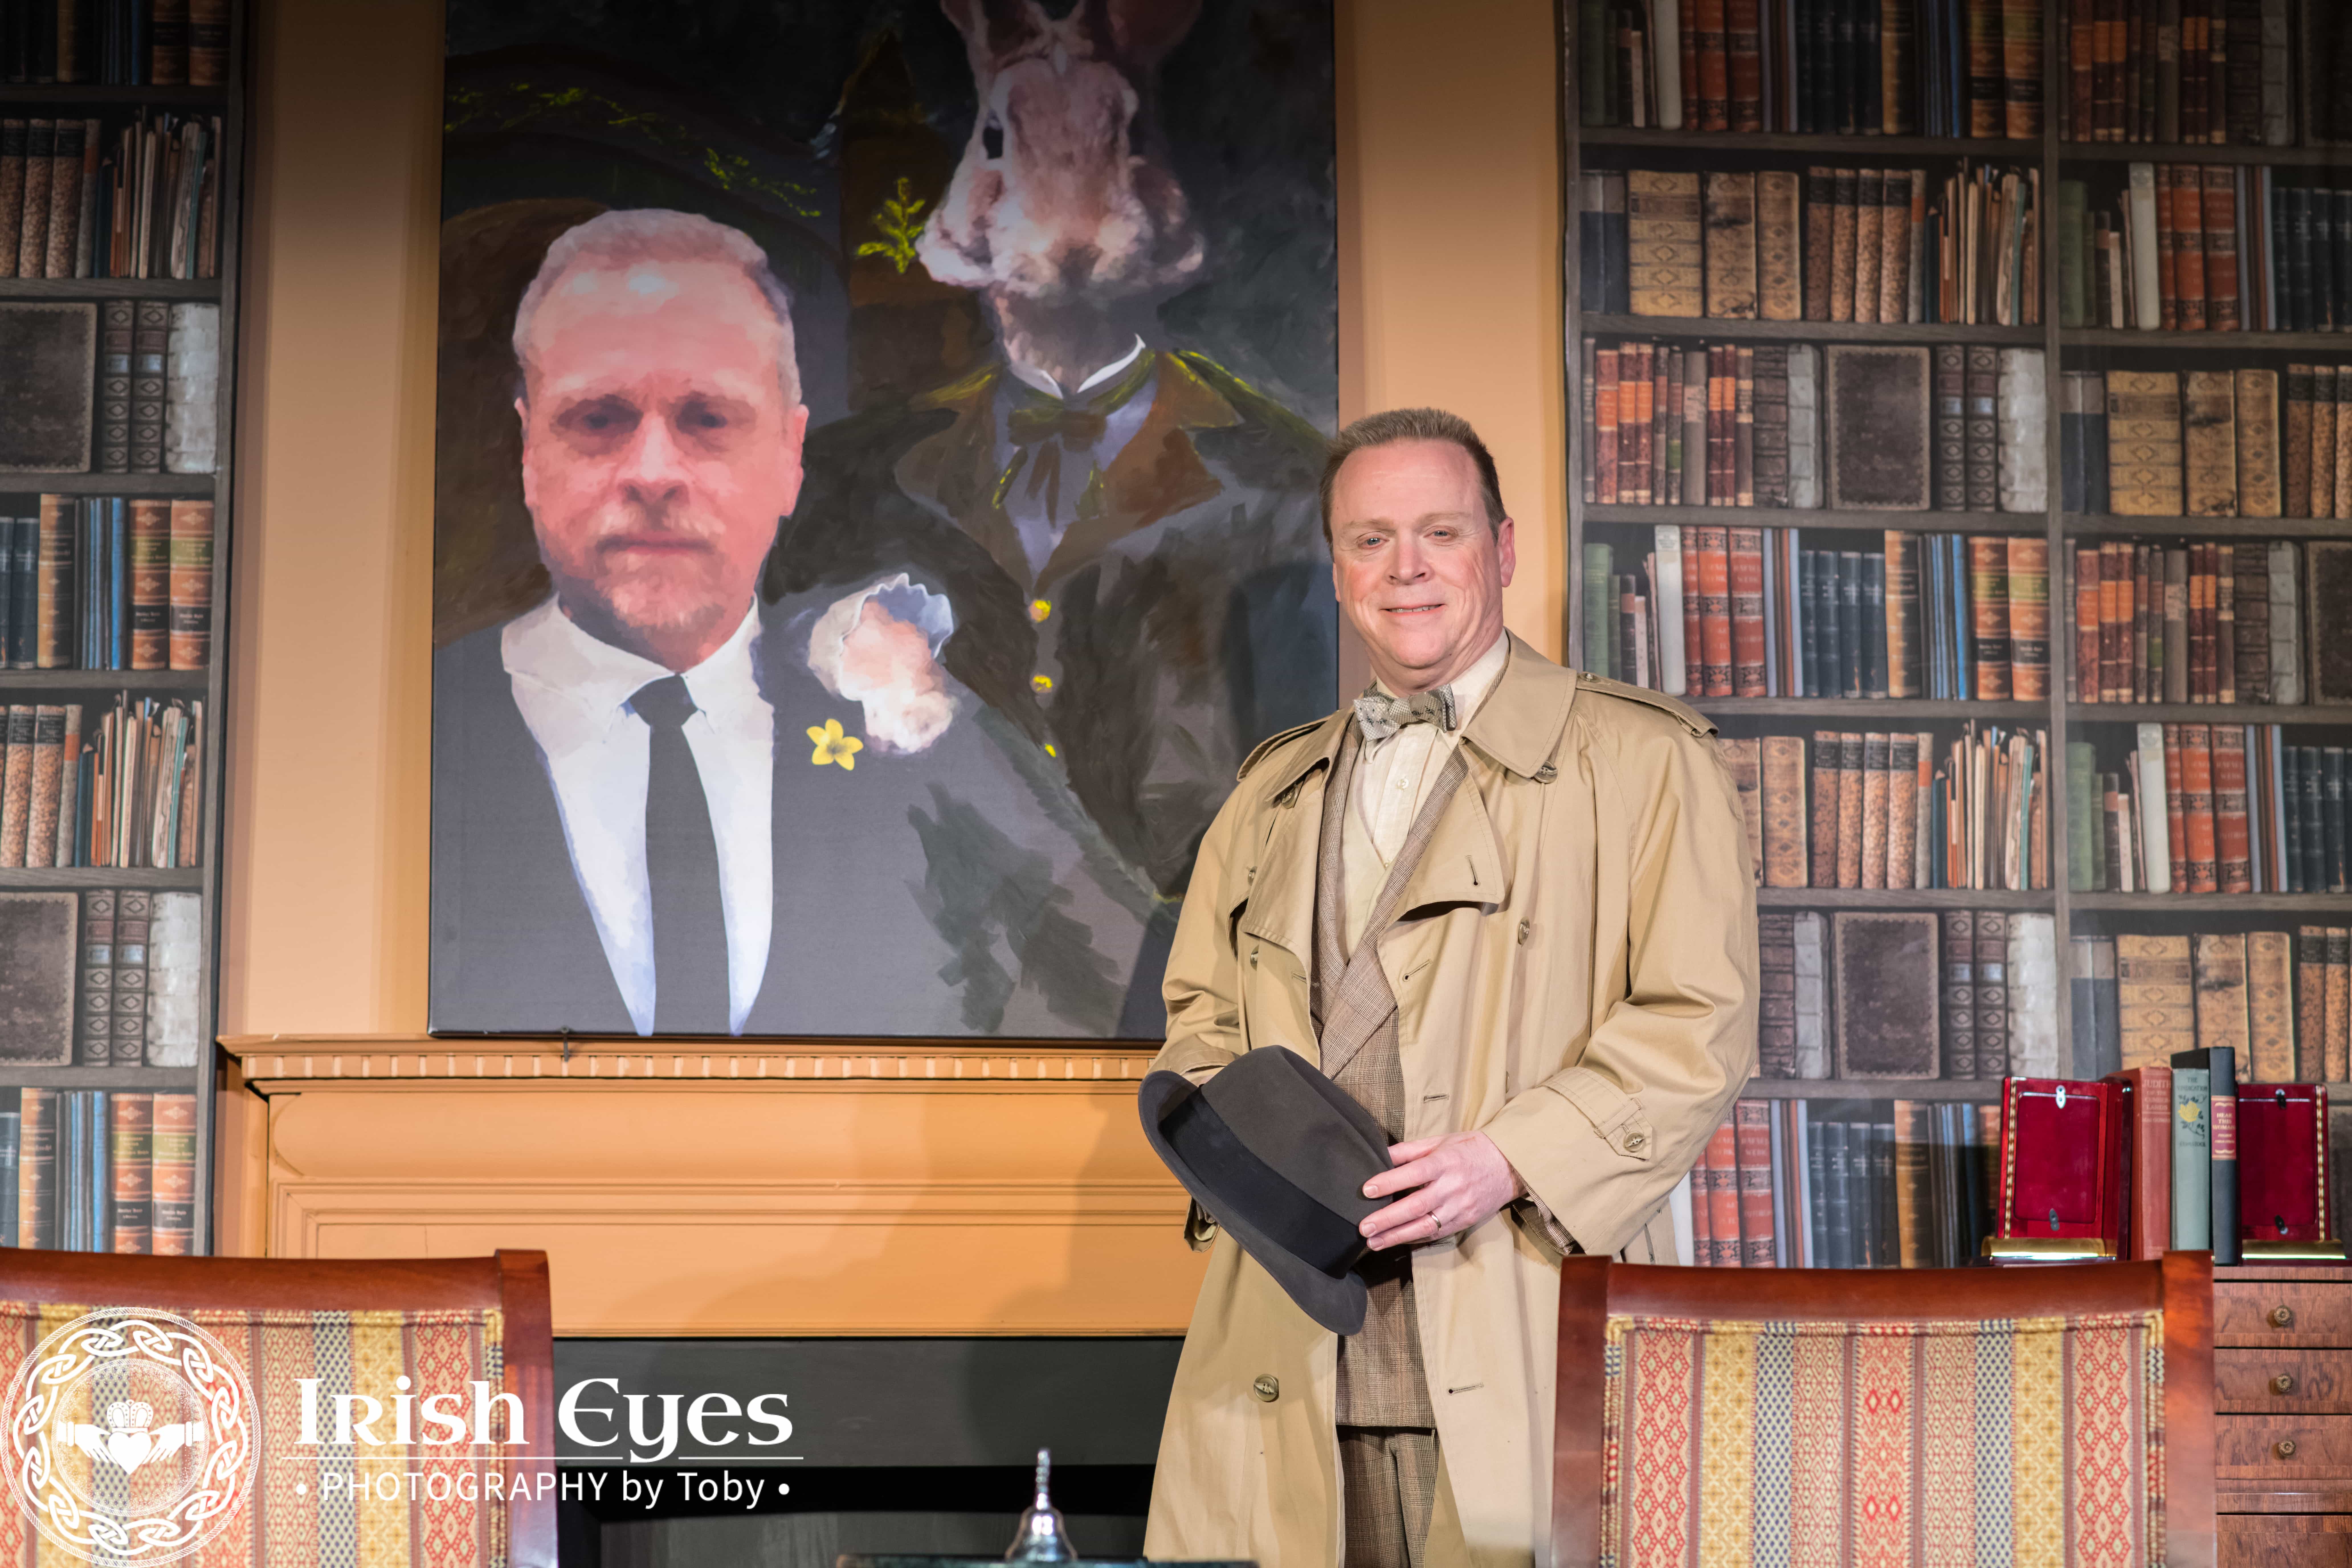 Elwood (Kevin Dykstra) in front of his portrait with Harvey. Photo credit: Irish Eyes Photography by Toby.